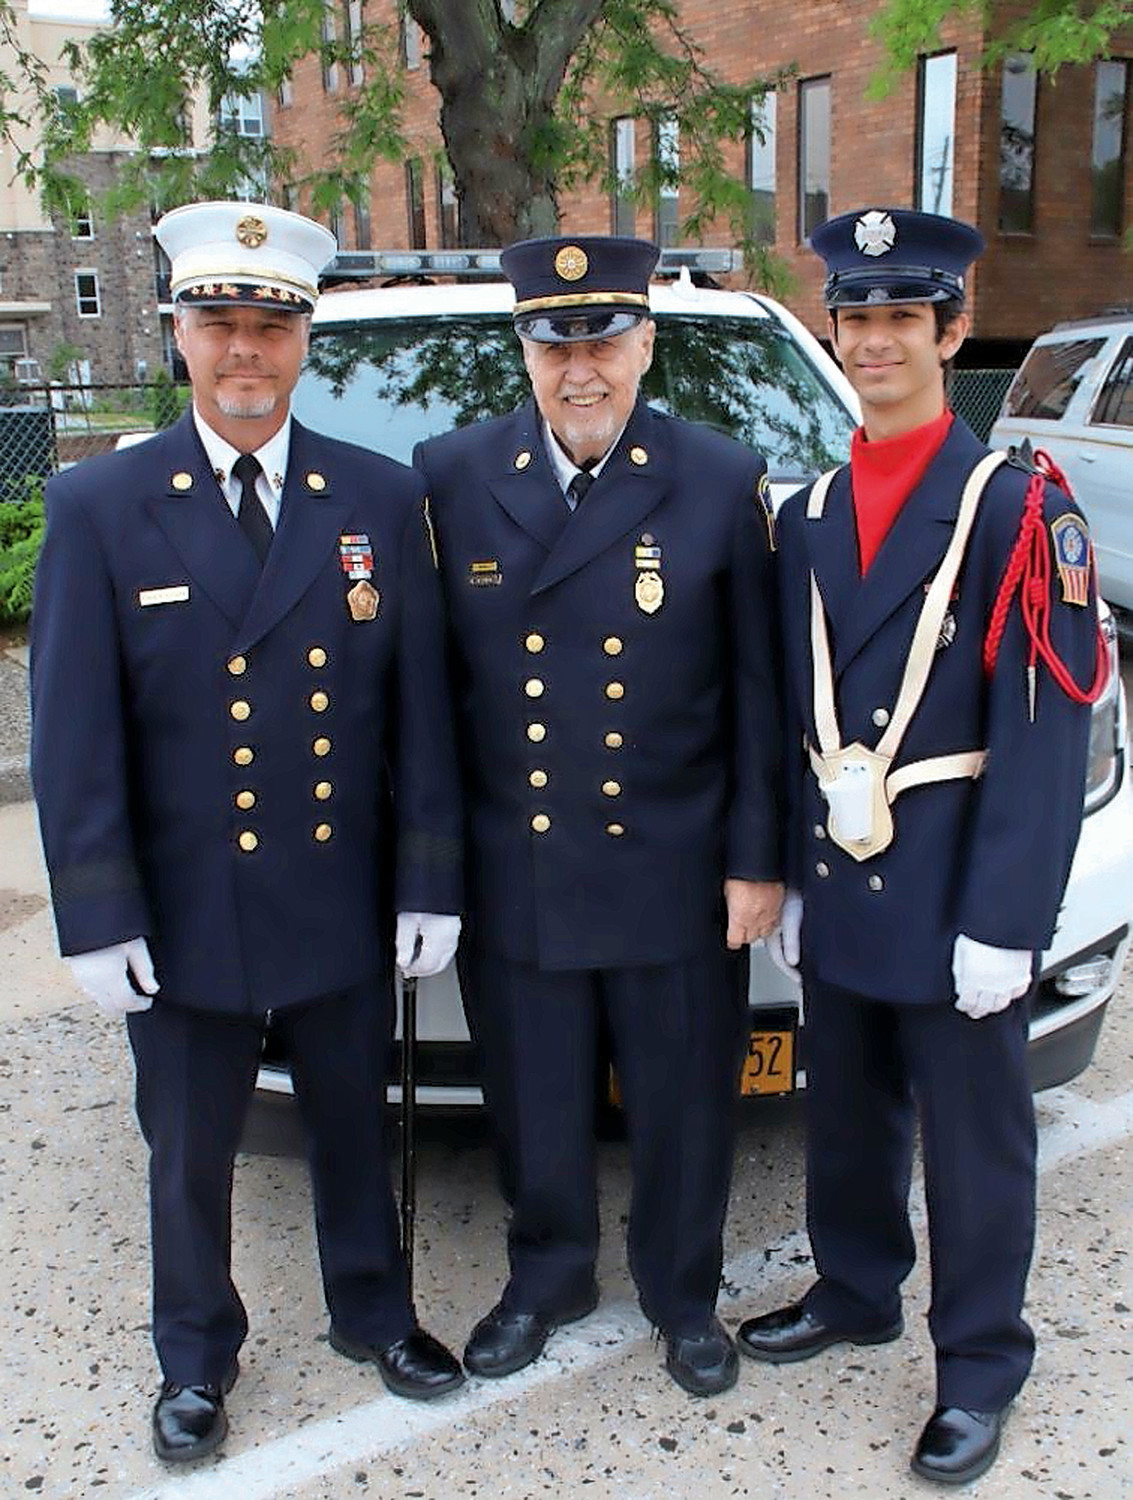 Honorary Fire Chief Thomas Cook, center, with his son, Brian, left, chief of department, and his grandson Johnny, a probationary firefighter, at Rockville Centre's Memorial Day Parade in May.